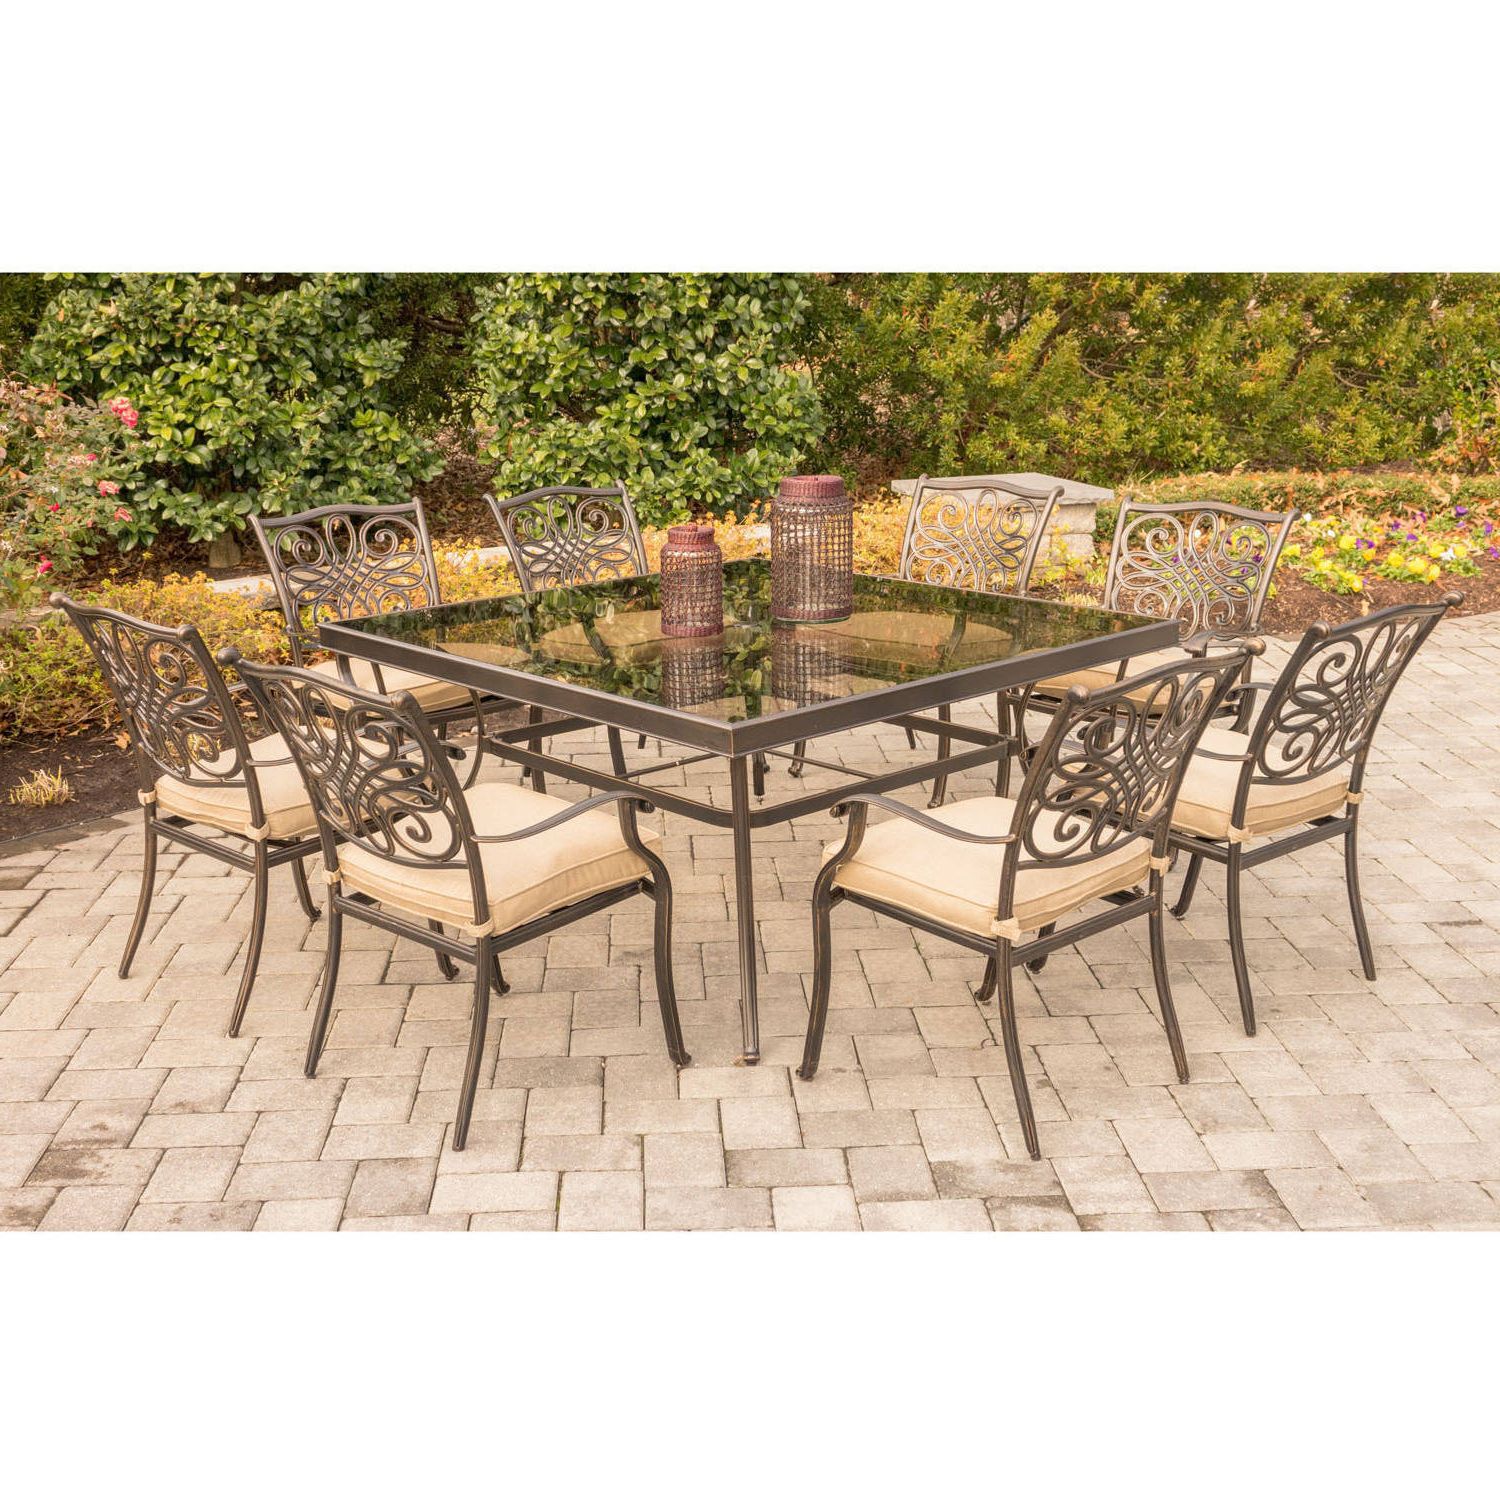 Most Popular Hanover Outdoor Traditions 9 Piece Dining Set With 60" Square Glass Top Inside Square 9 Piece Outdoor Dining Sets (View 2 of 15)